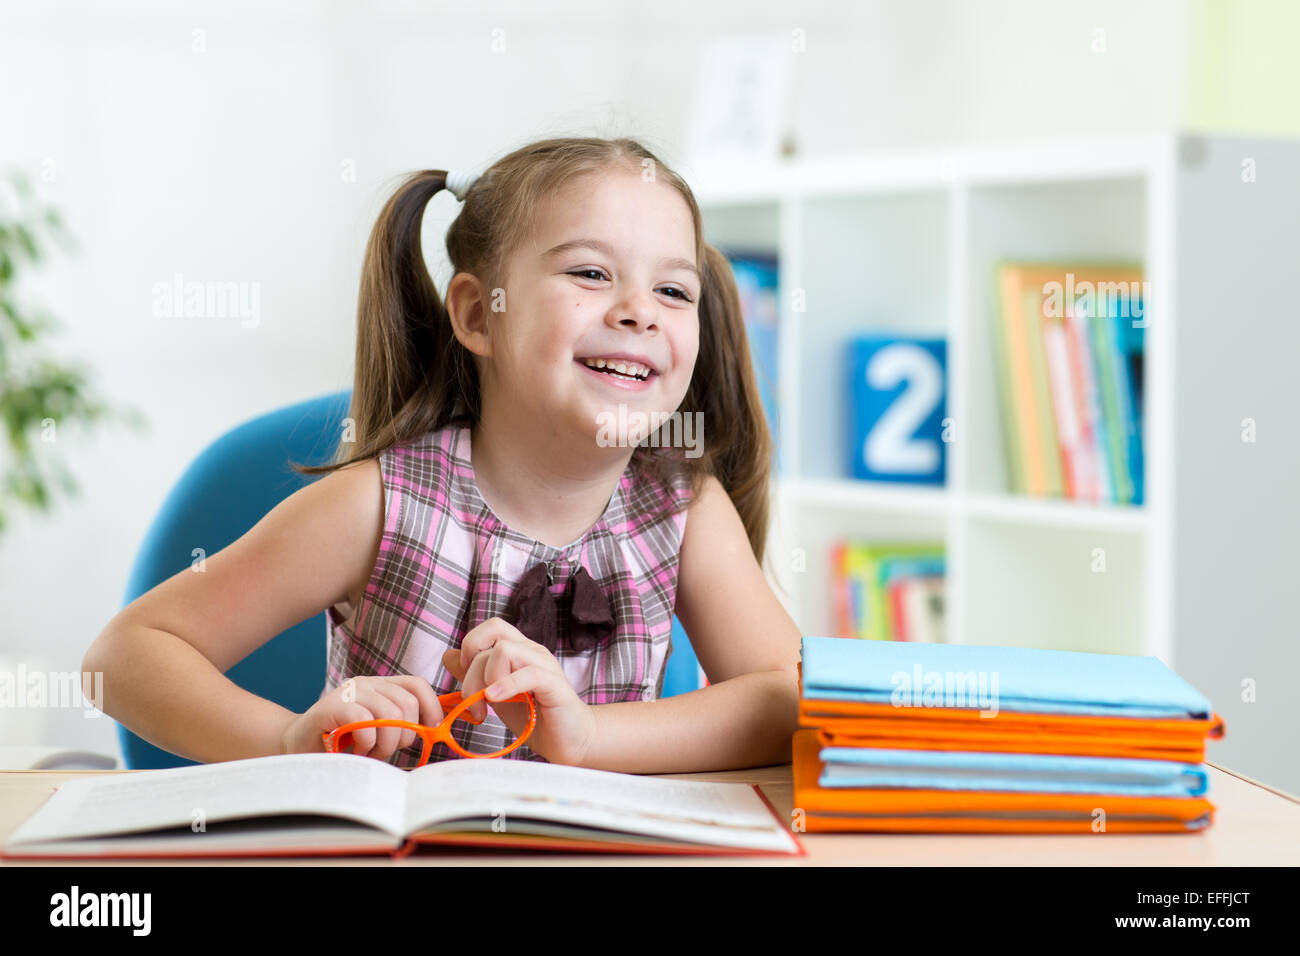 cute smiling kid reading book in children room Stock Photo